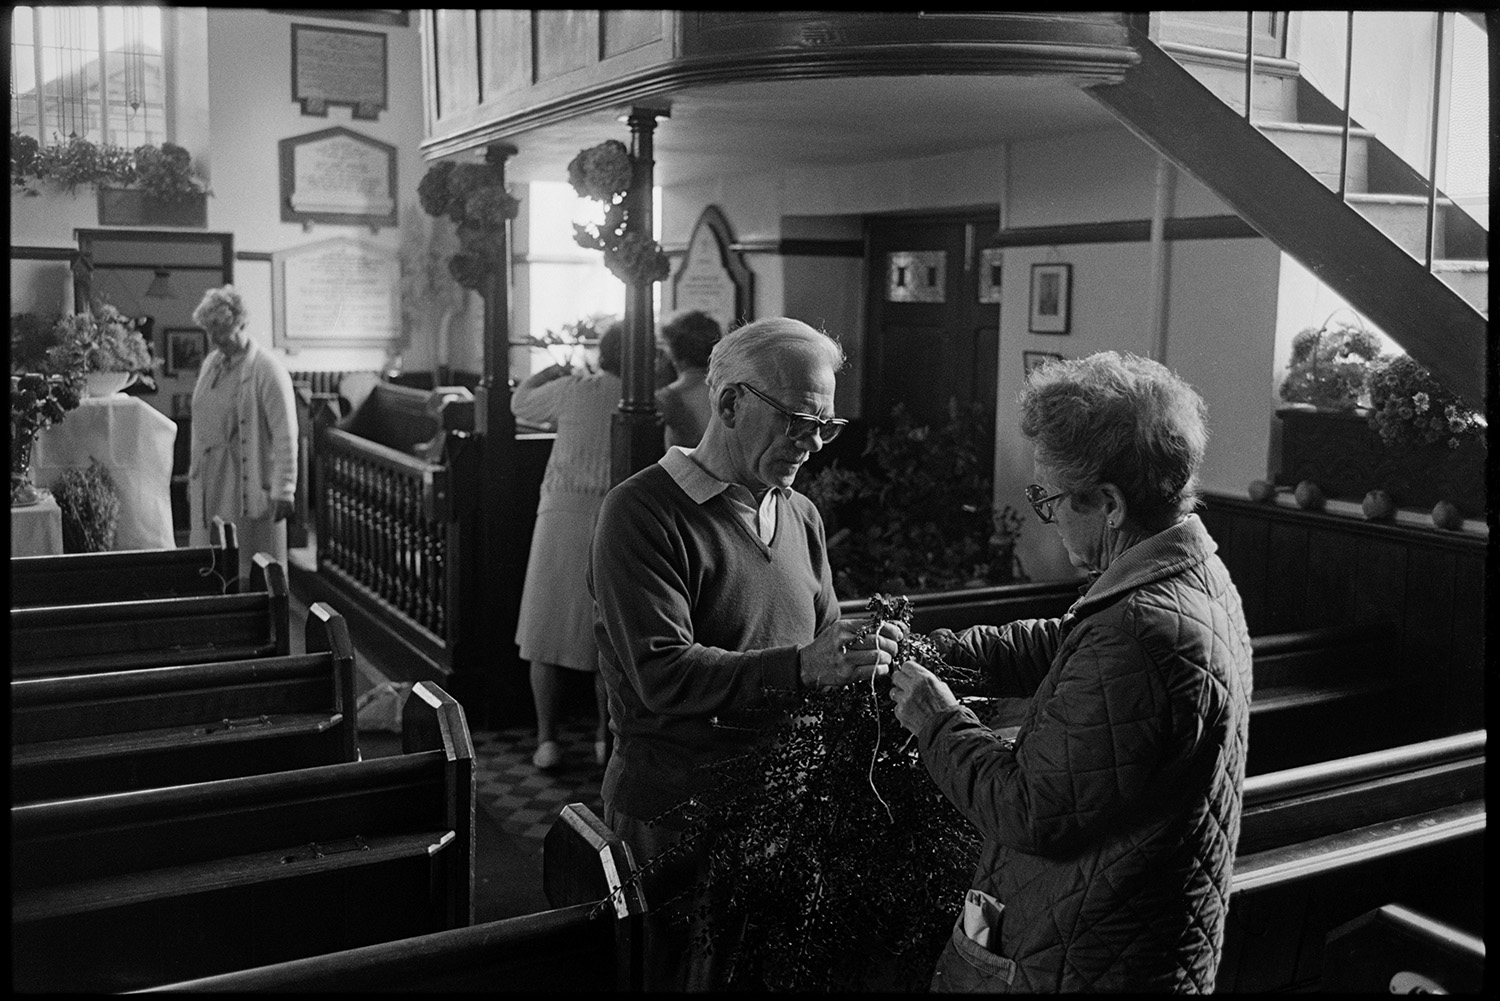 Congregational chapel interior with people decorating for Harvest Festival and having tea. 
[A man and woman tying together foliage for a display for the Harvest Festival in Chulmleigh Congregational Church. Pews and steps leading to the gallery can be seen inside the church.]